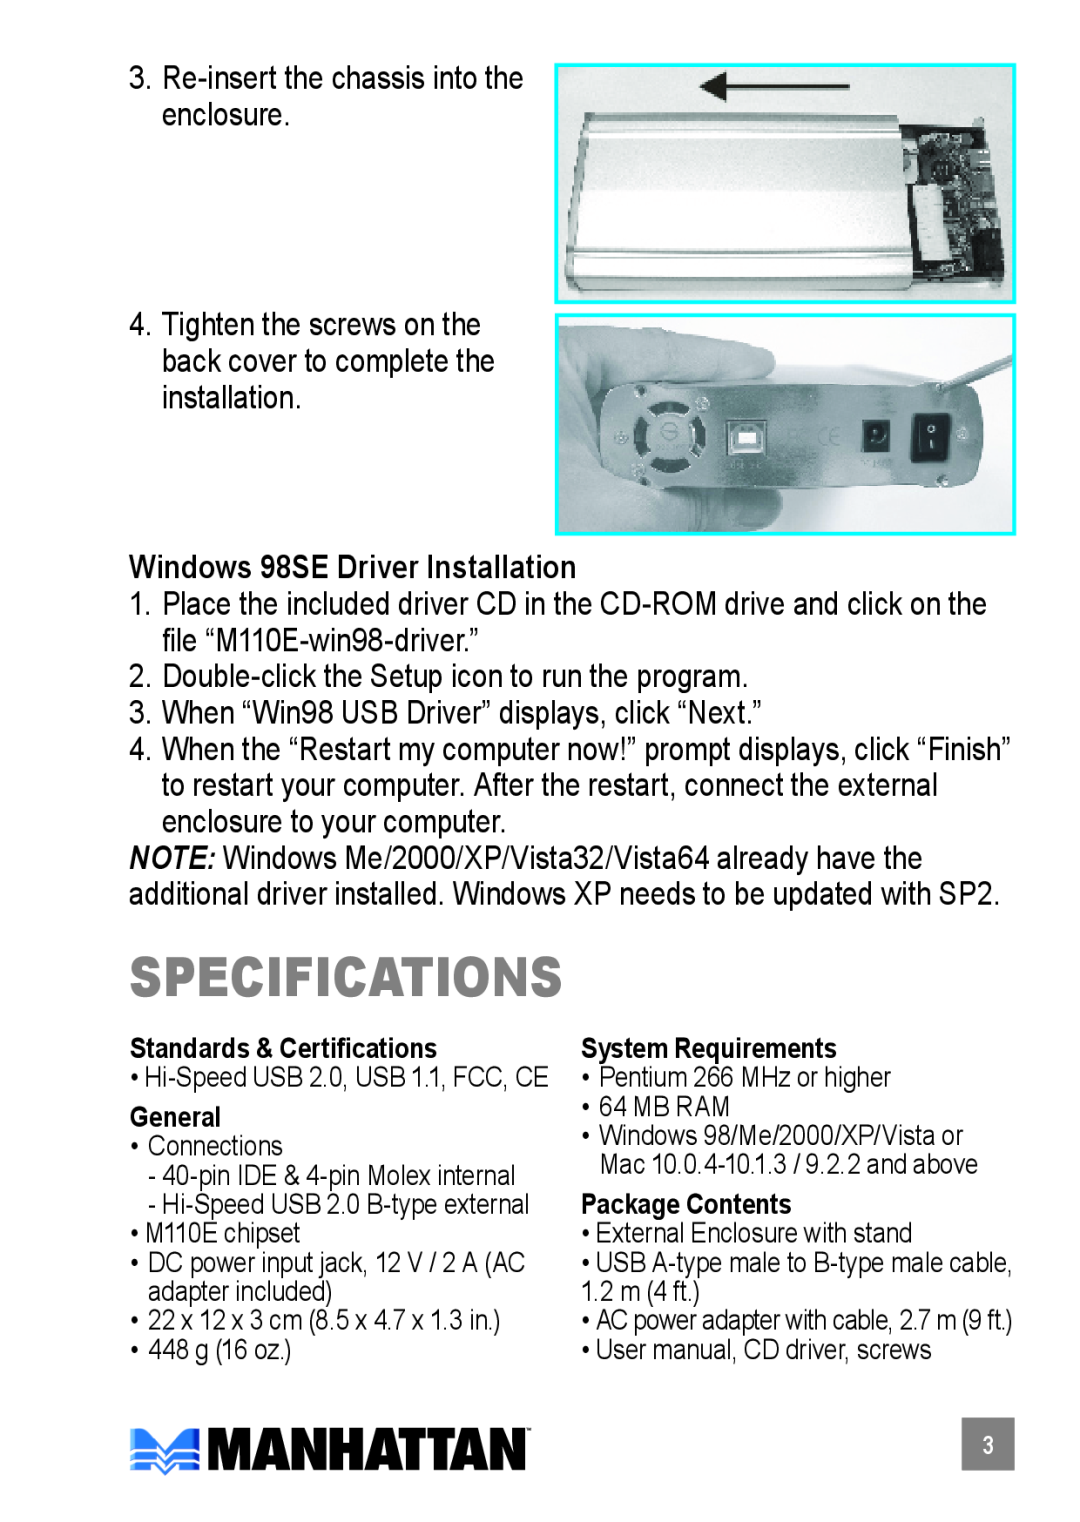 Manhattan Computer Products 703253 user manual specifications, Windows 98SE Driver Installation 